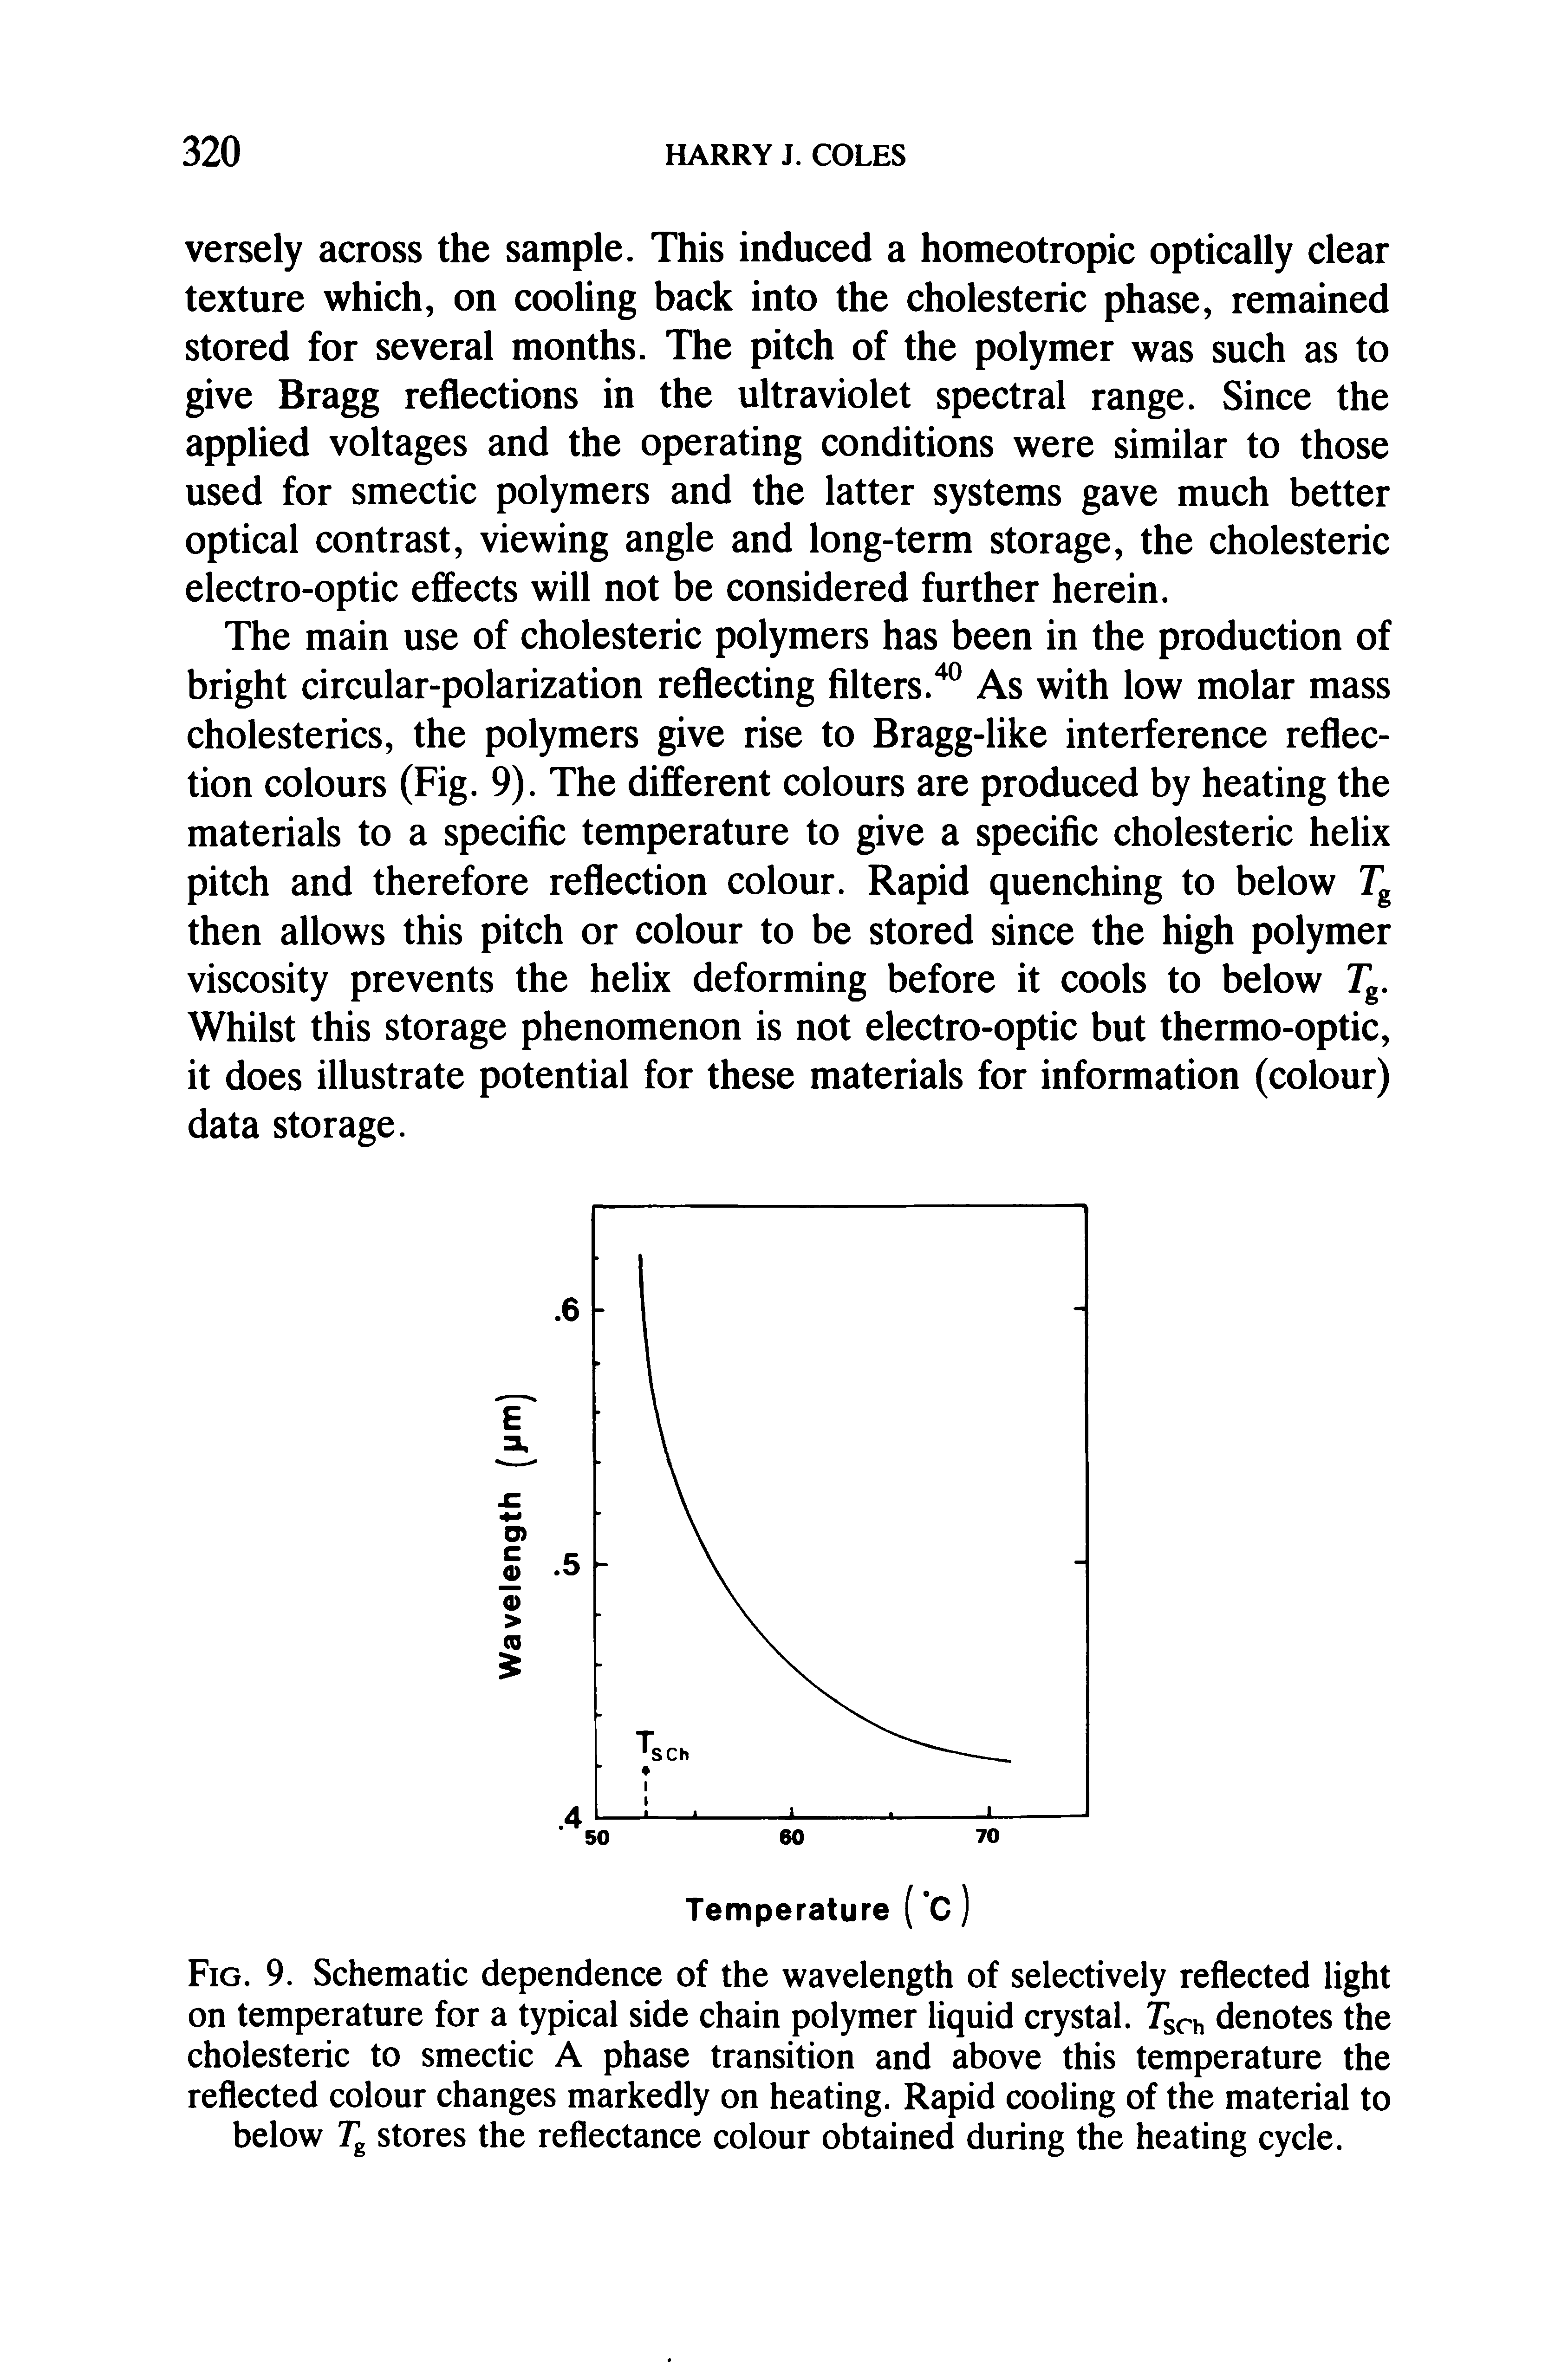 Fig. 9. Schematic dependence of the wavelength of selectively reflected light on temperature for a typical side chain polymer liquid crystal. Tsch denotes the cholesteric to smectic A phase transition and above this temperature the reflected colour changes markedly on heating. Rapid cooling of the material to below Tg stores the reflectance colour obtained during the heating cycle.